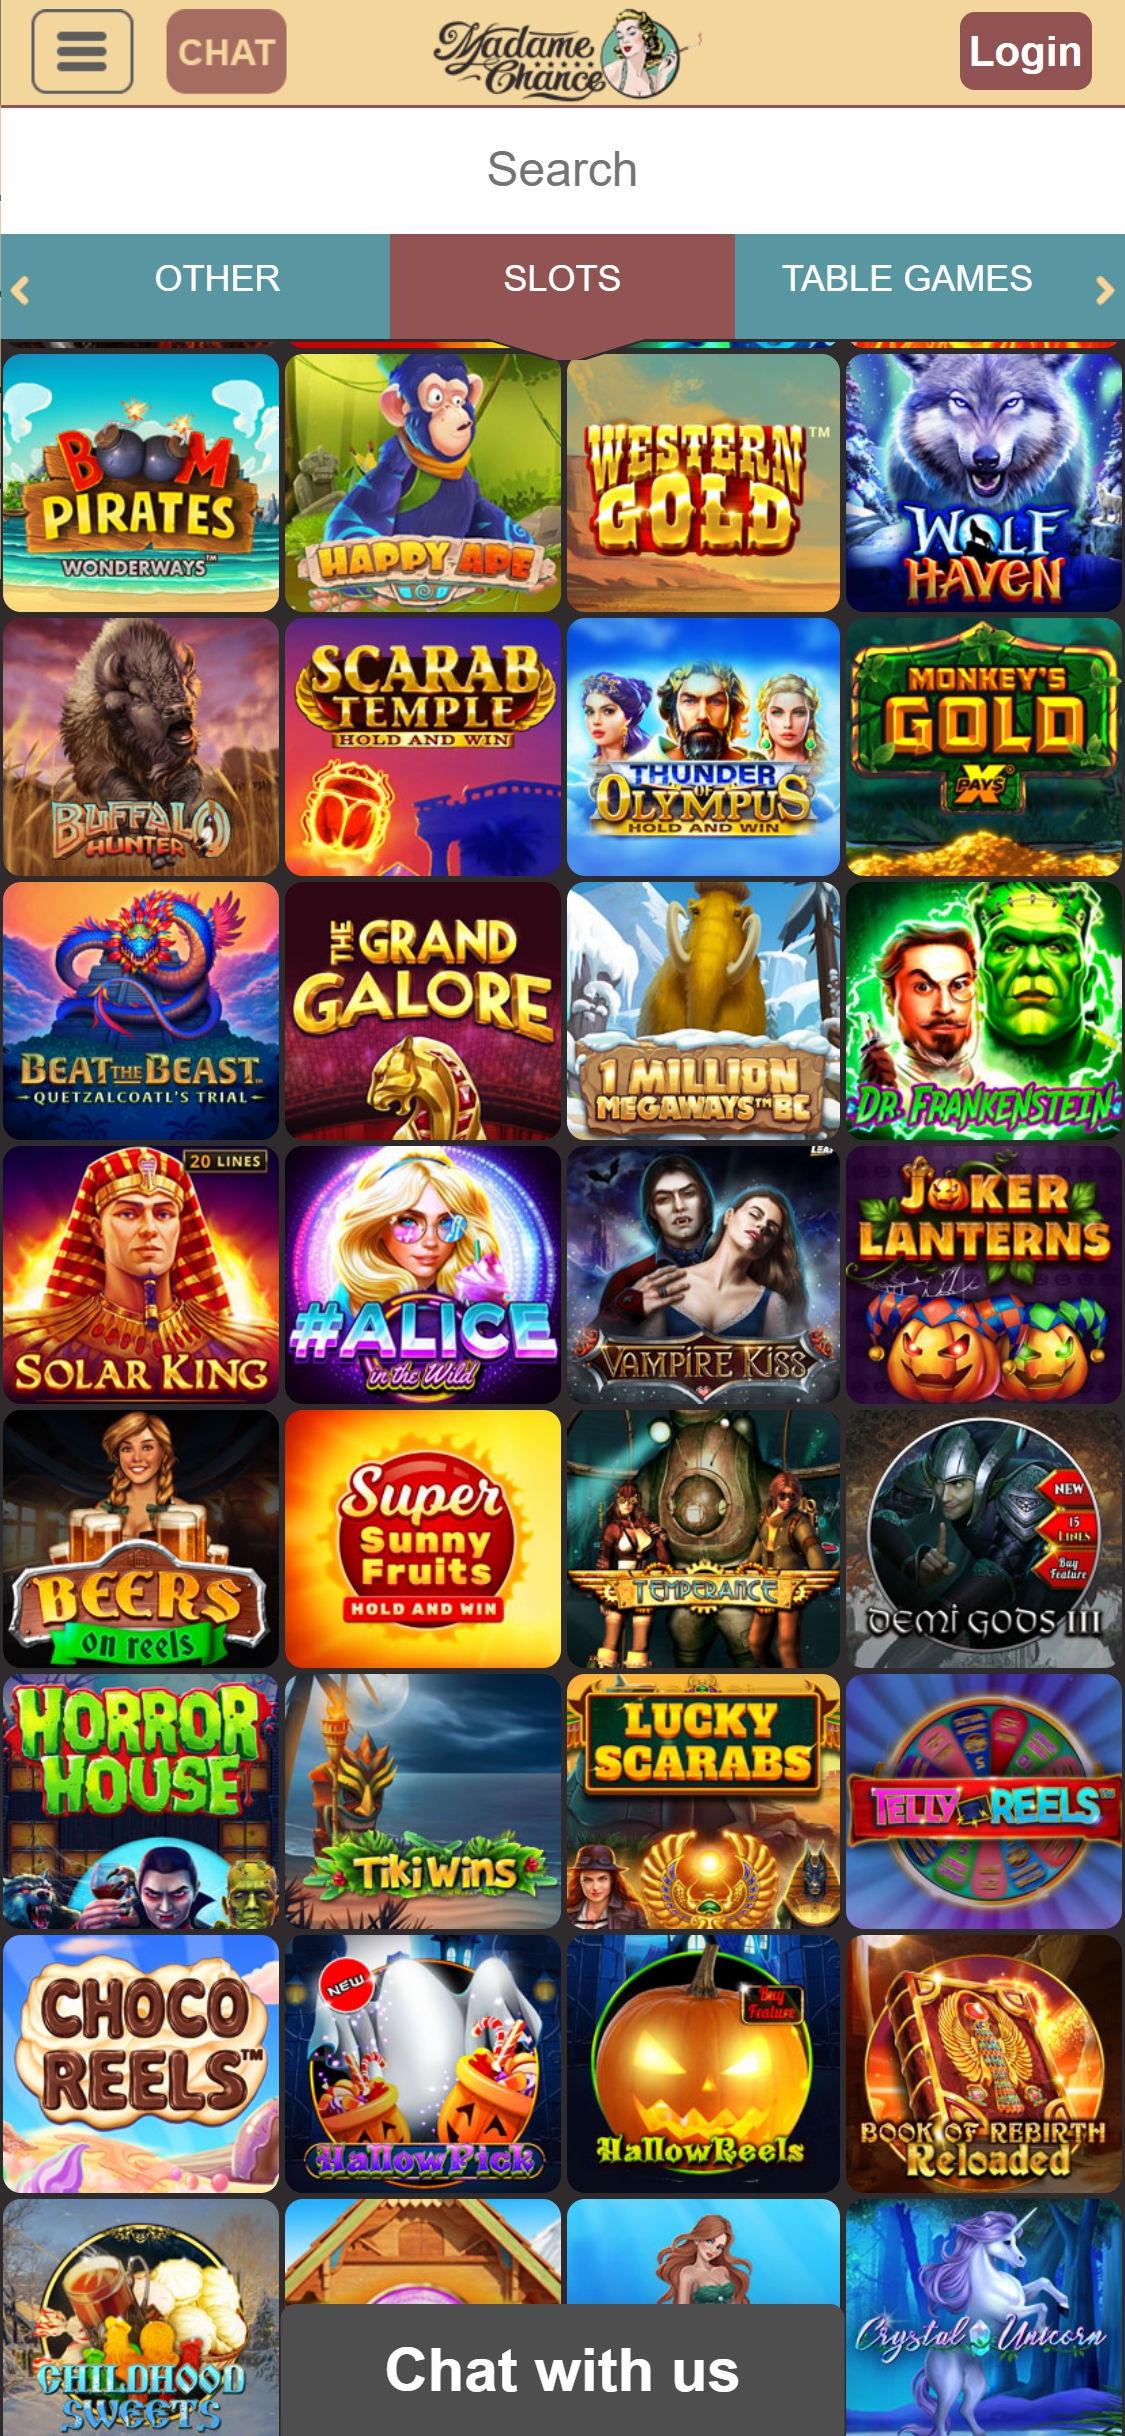 Madame Chance Casino Mobile Games Review